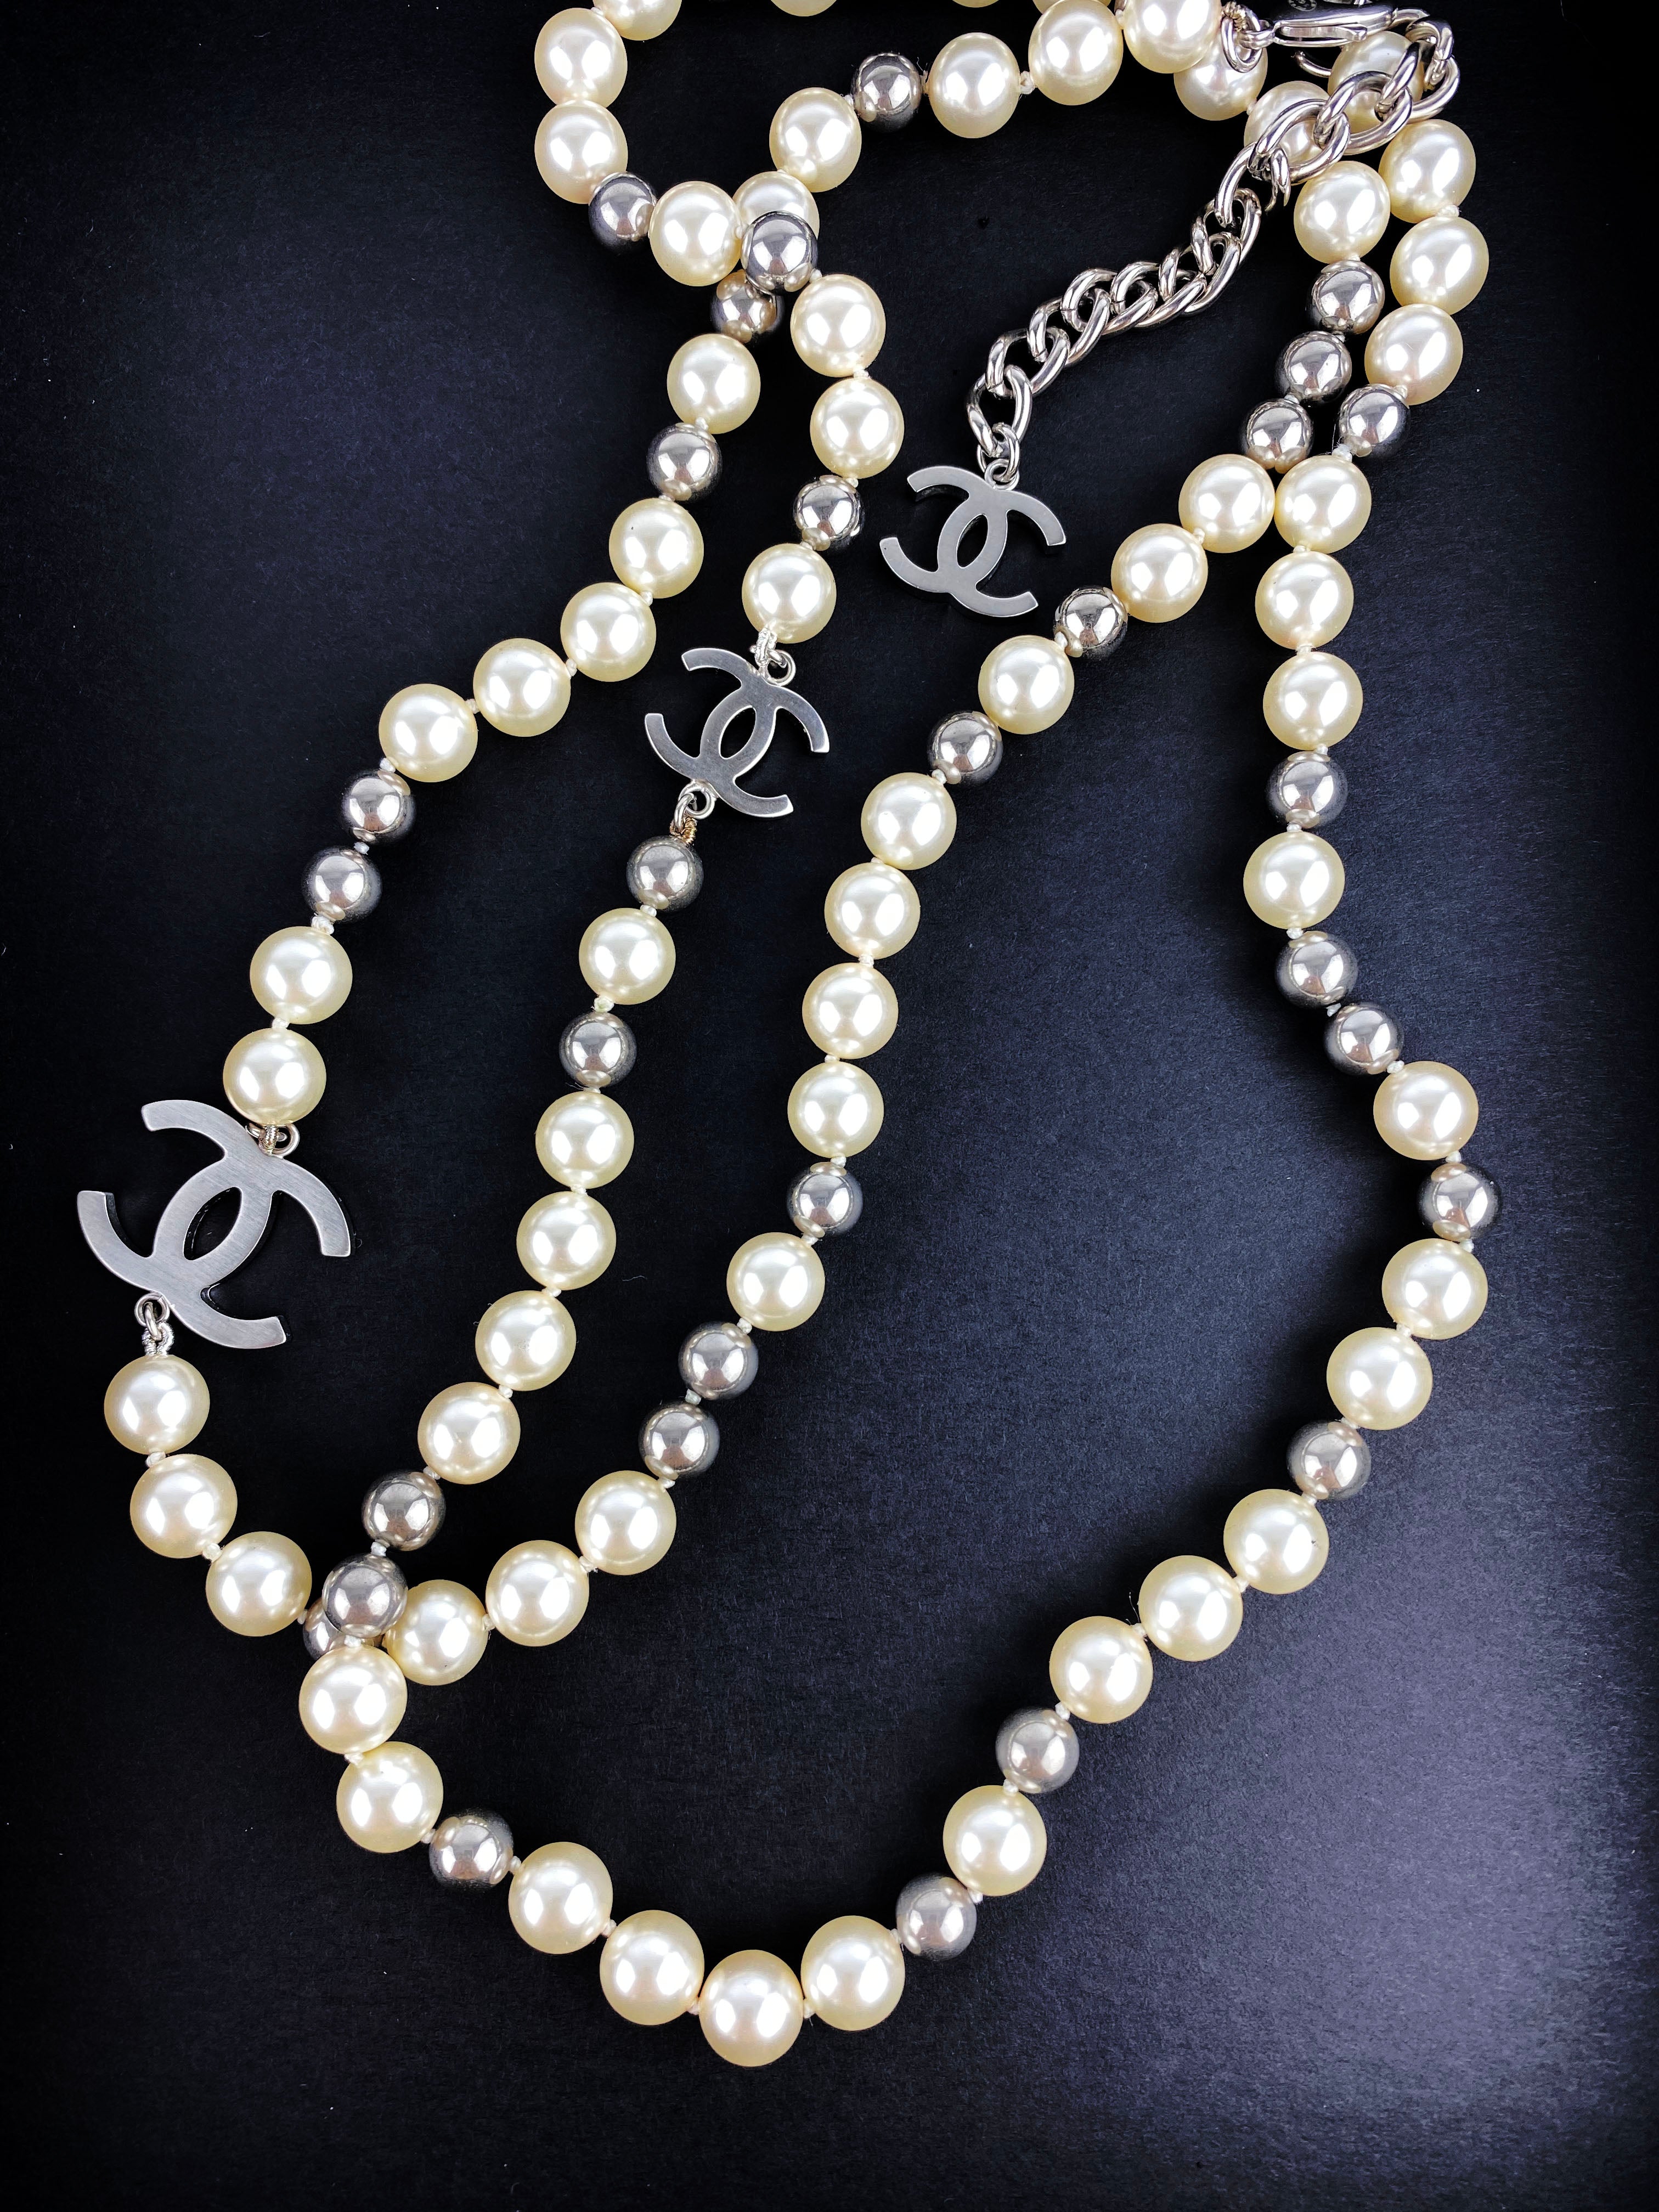 chanel-pearl-cc-necklace-2.jpg